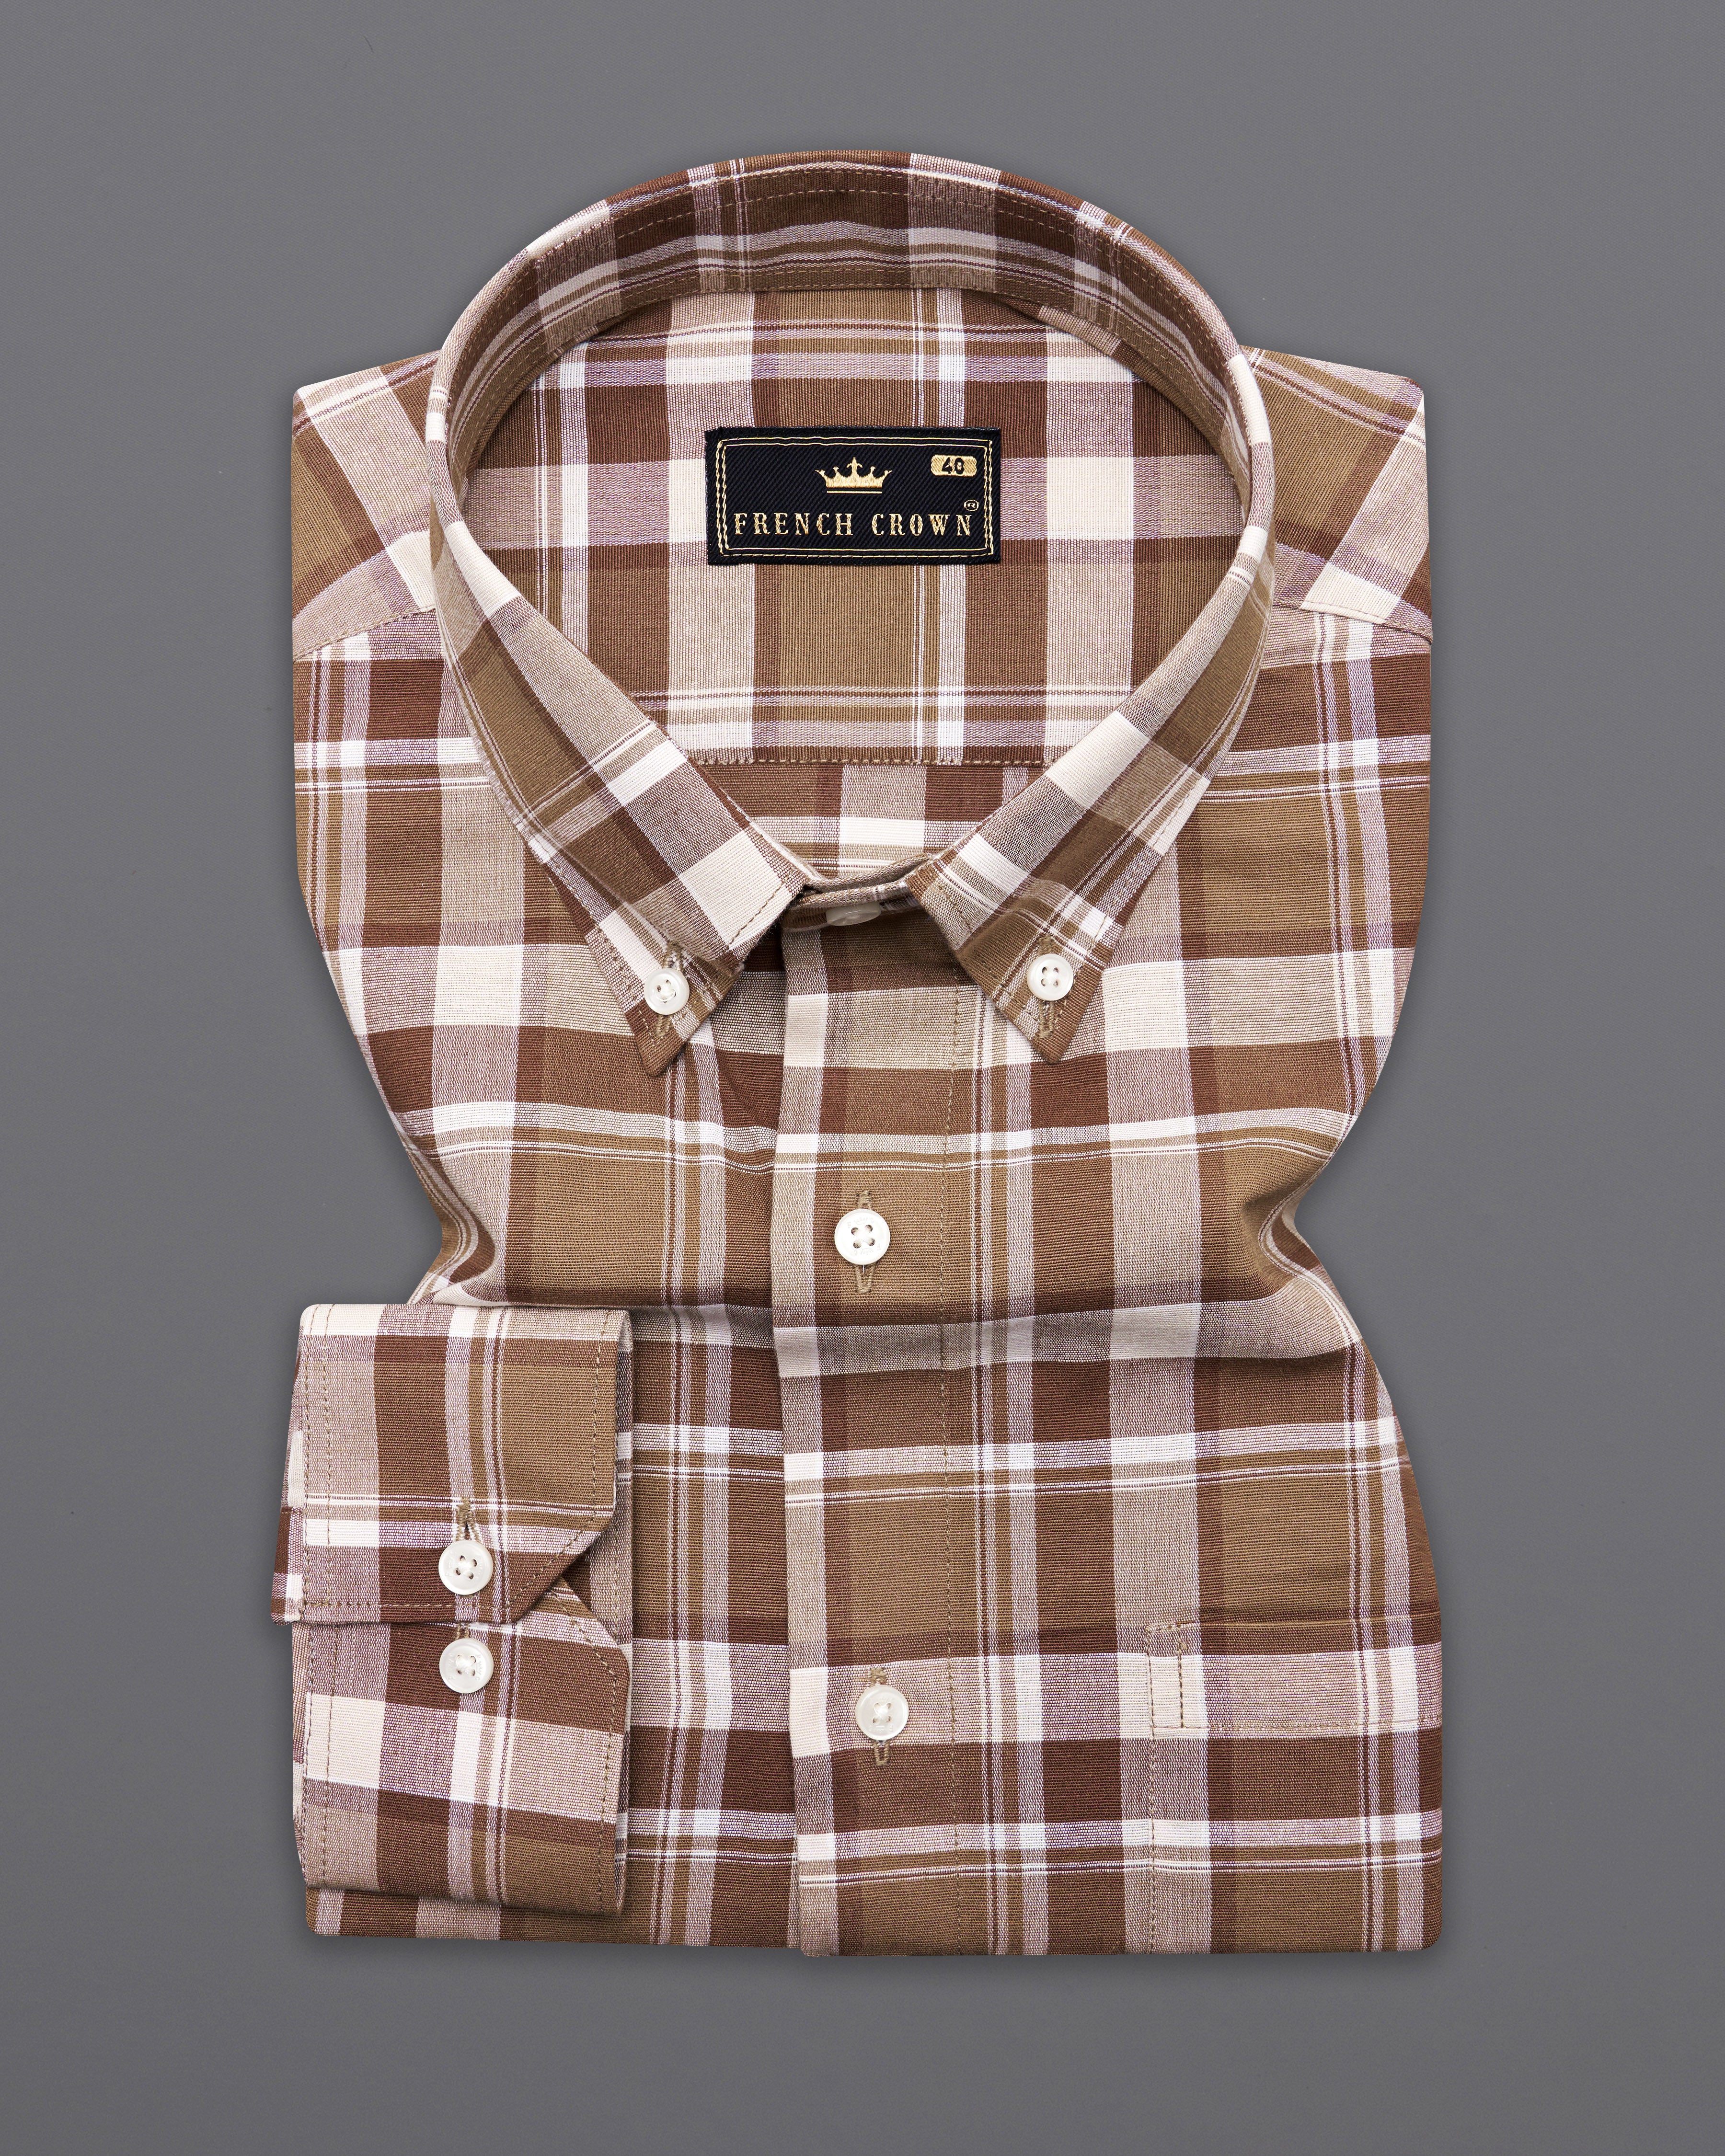 Spice Brown and White Plaid Chambray Button-Down Shirt 9993-BD-38, 9993-BD-H-38, 9993-BD-39, 9993-BD-H-39, 9993-BD-40, 9993-BD-H-40, 9993-BD-42, 9993-BD-H-42, 9993-BD-44, 9993-BD-H-44, 9993-BD-46, 9993-BD-H-46, 9993-BD-48, 9993-BD-H-48, 9993-BD-50, 9993-BD-H-50, 9993-BD-52, 9993-BD-H-52